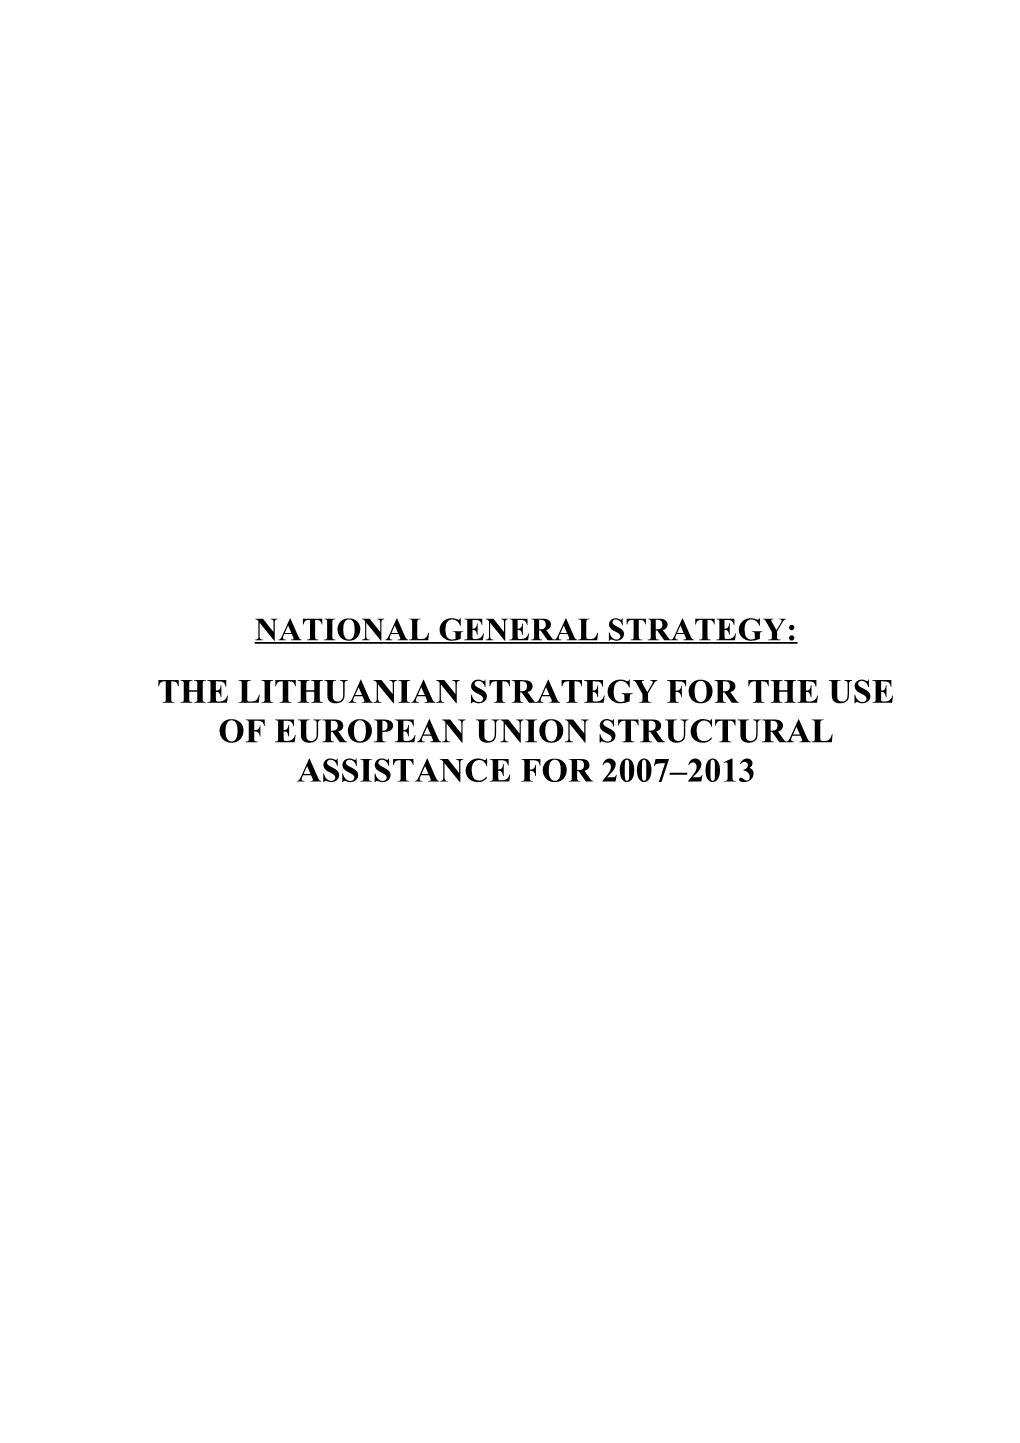 The Lithuanian Strategy for the Use of European Union Structural Assistance for 2007 2013